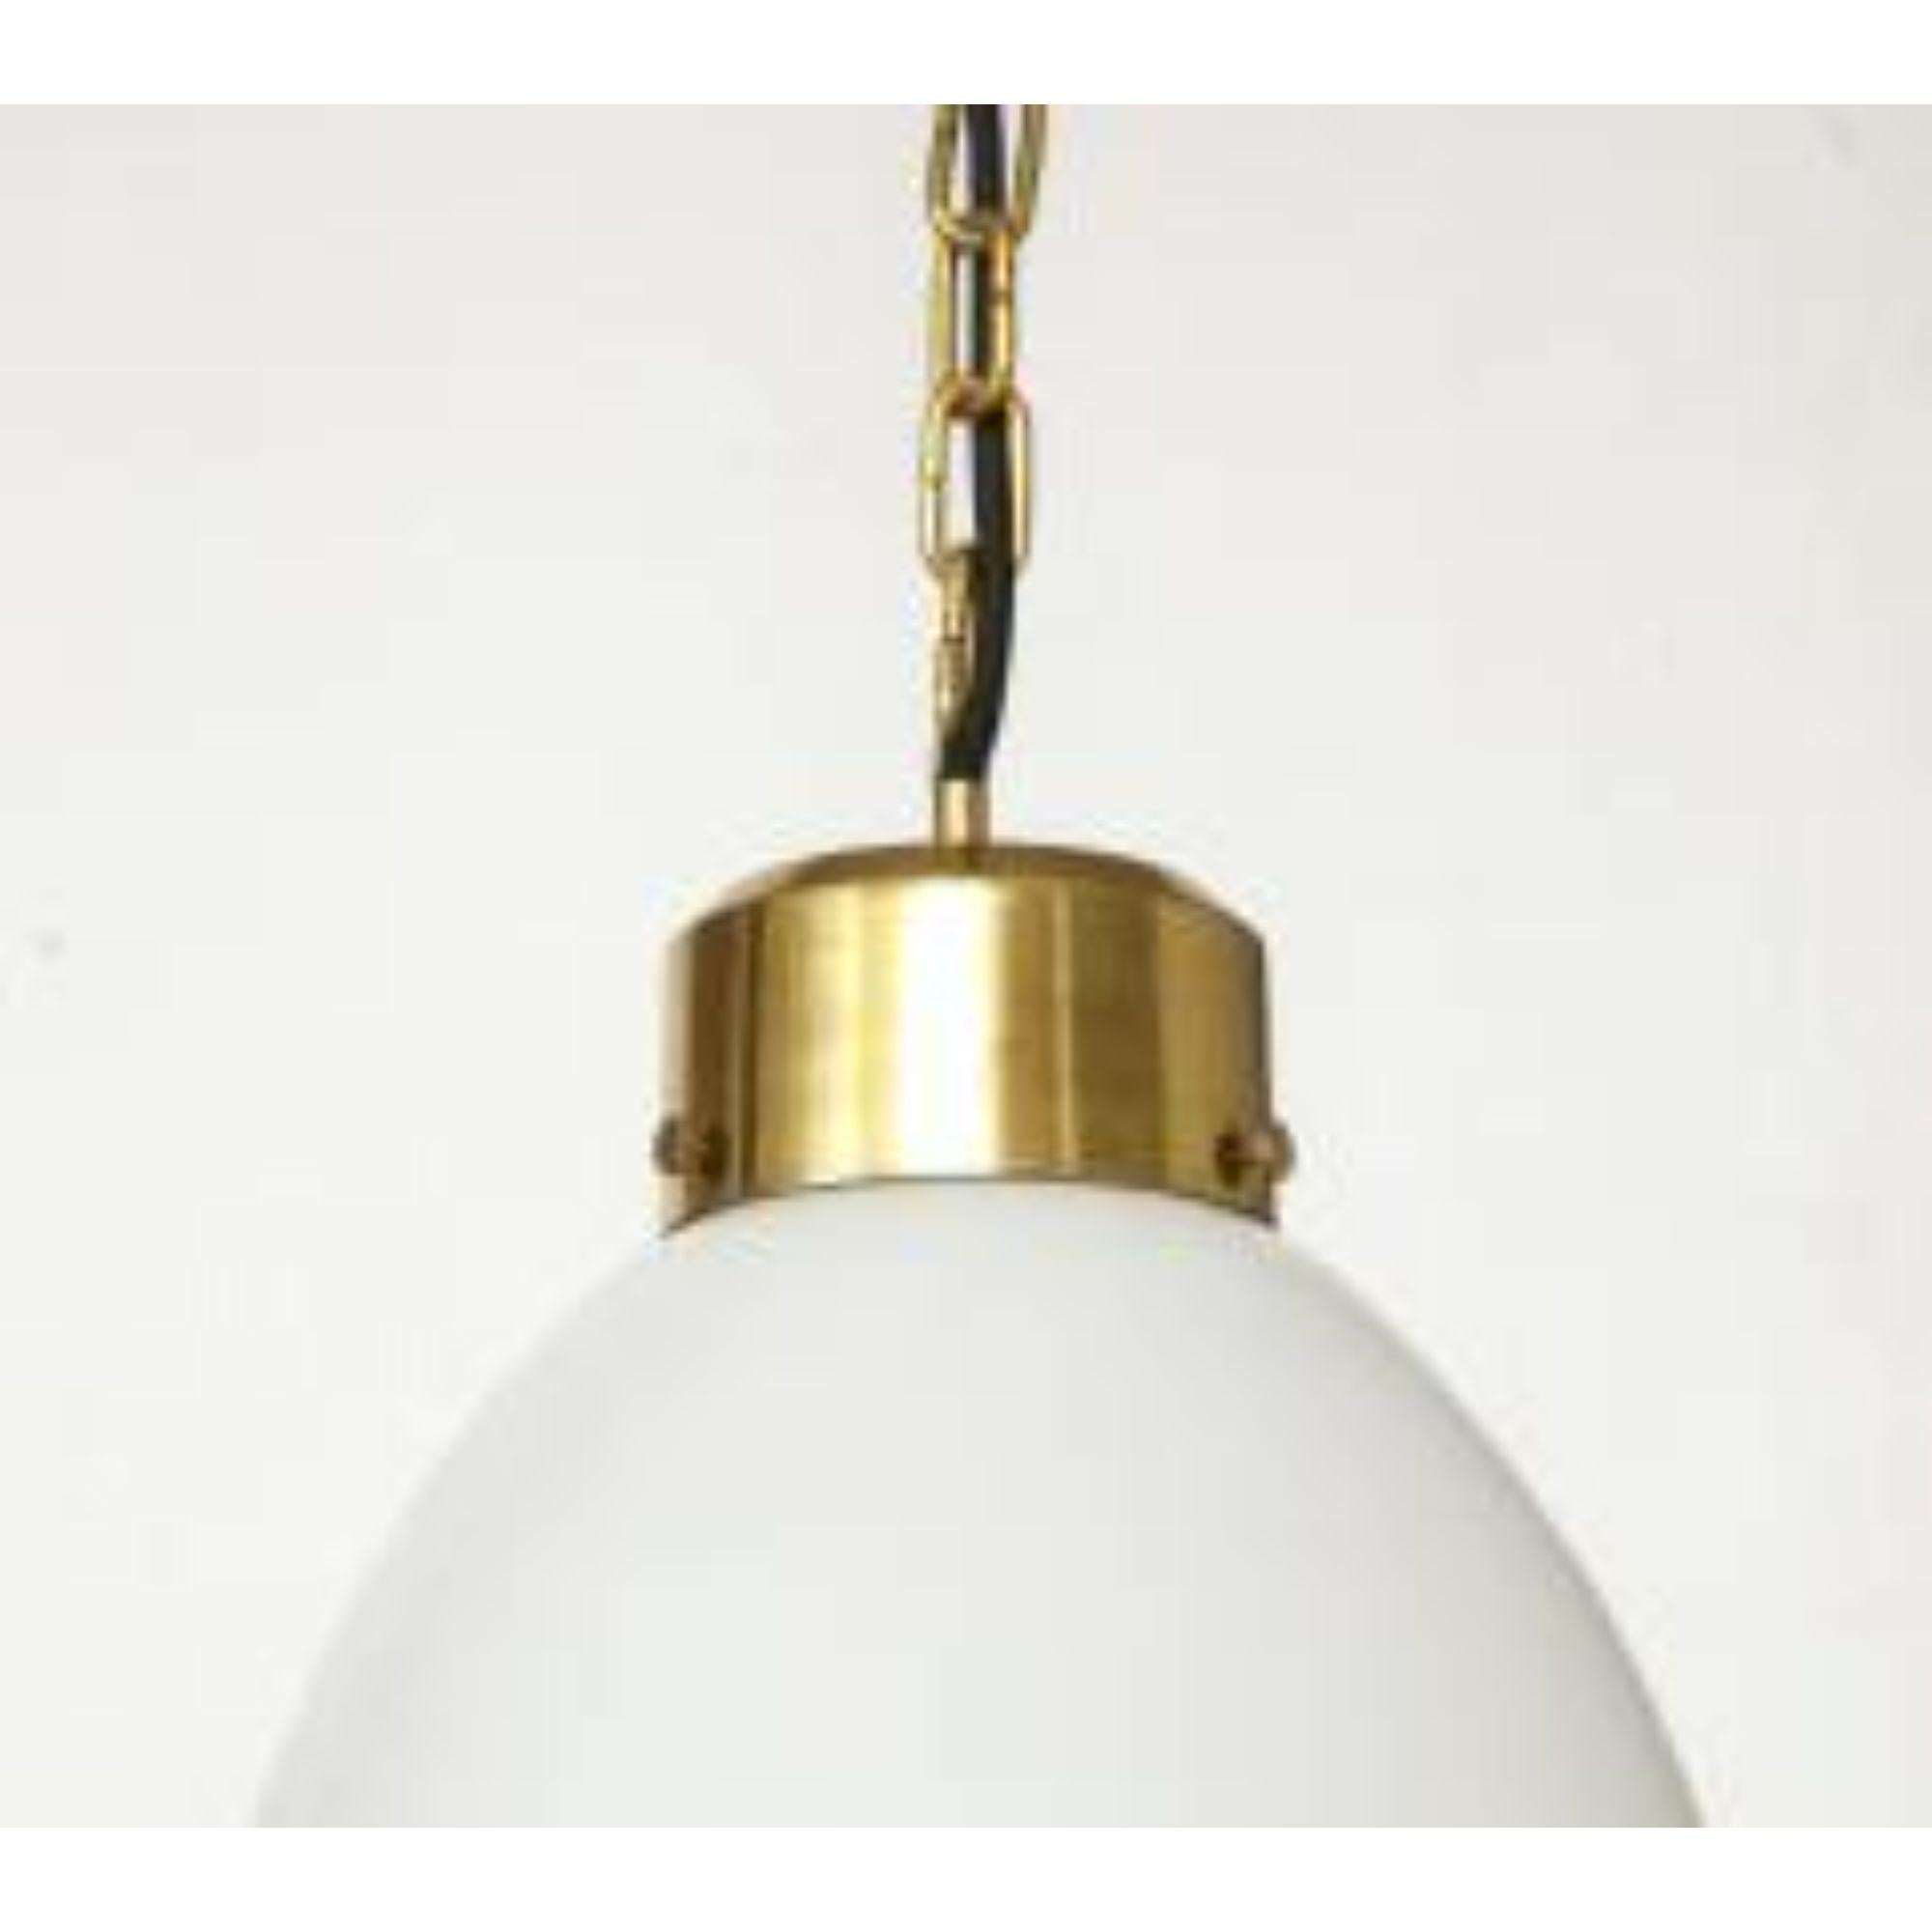 Midcentury Pendant in Brass and White Opaline Glass, Mid-20th Century For Sale 5